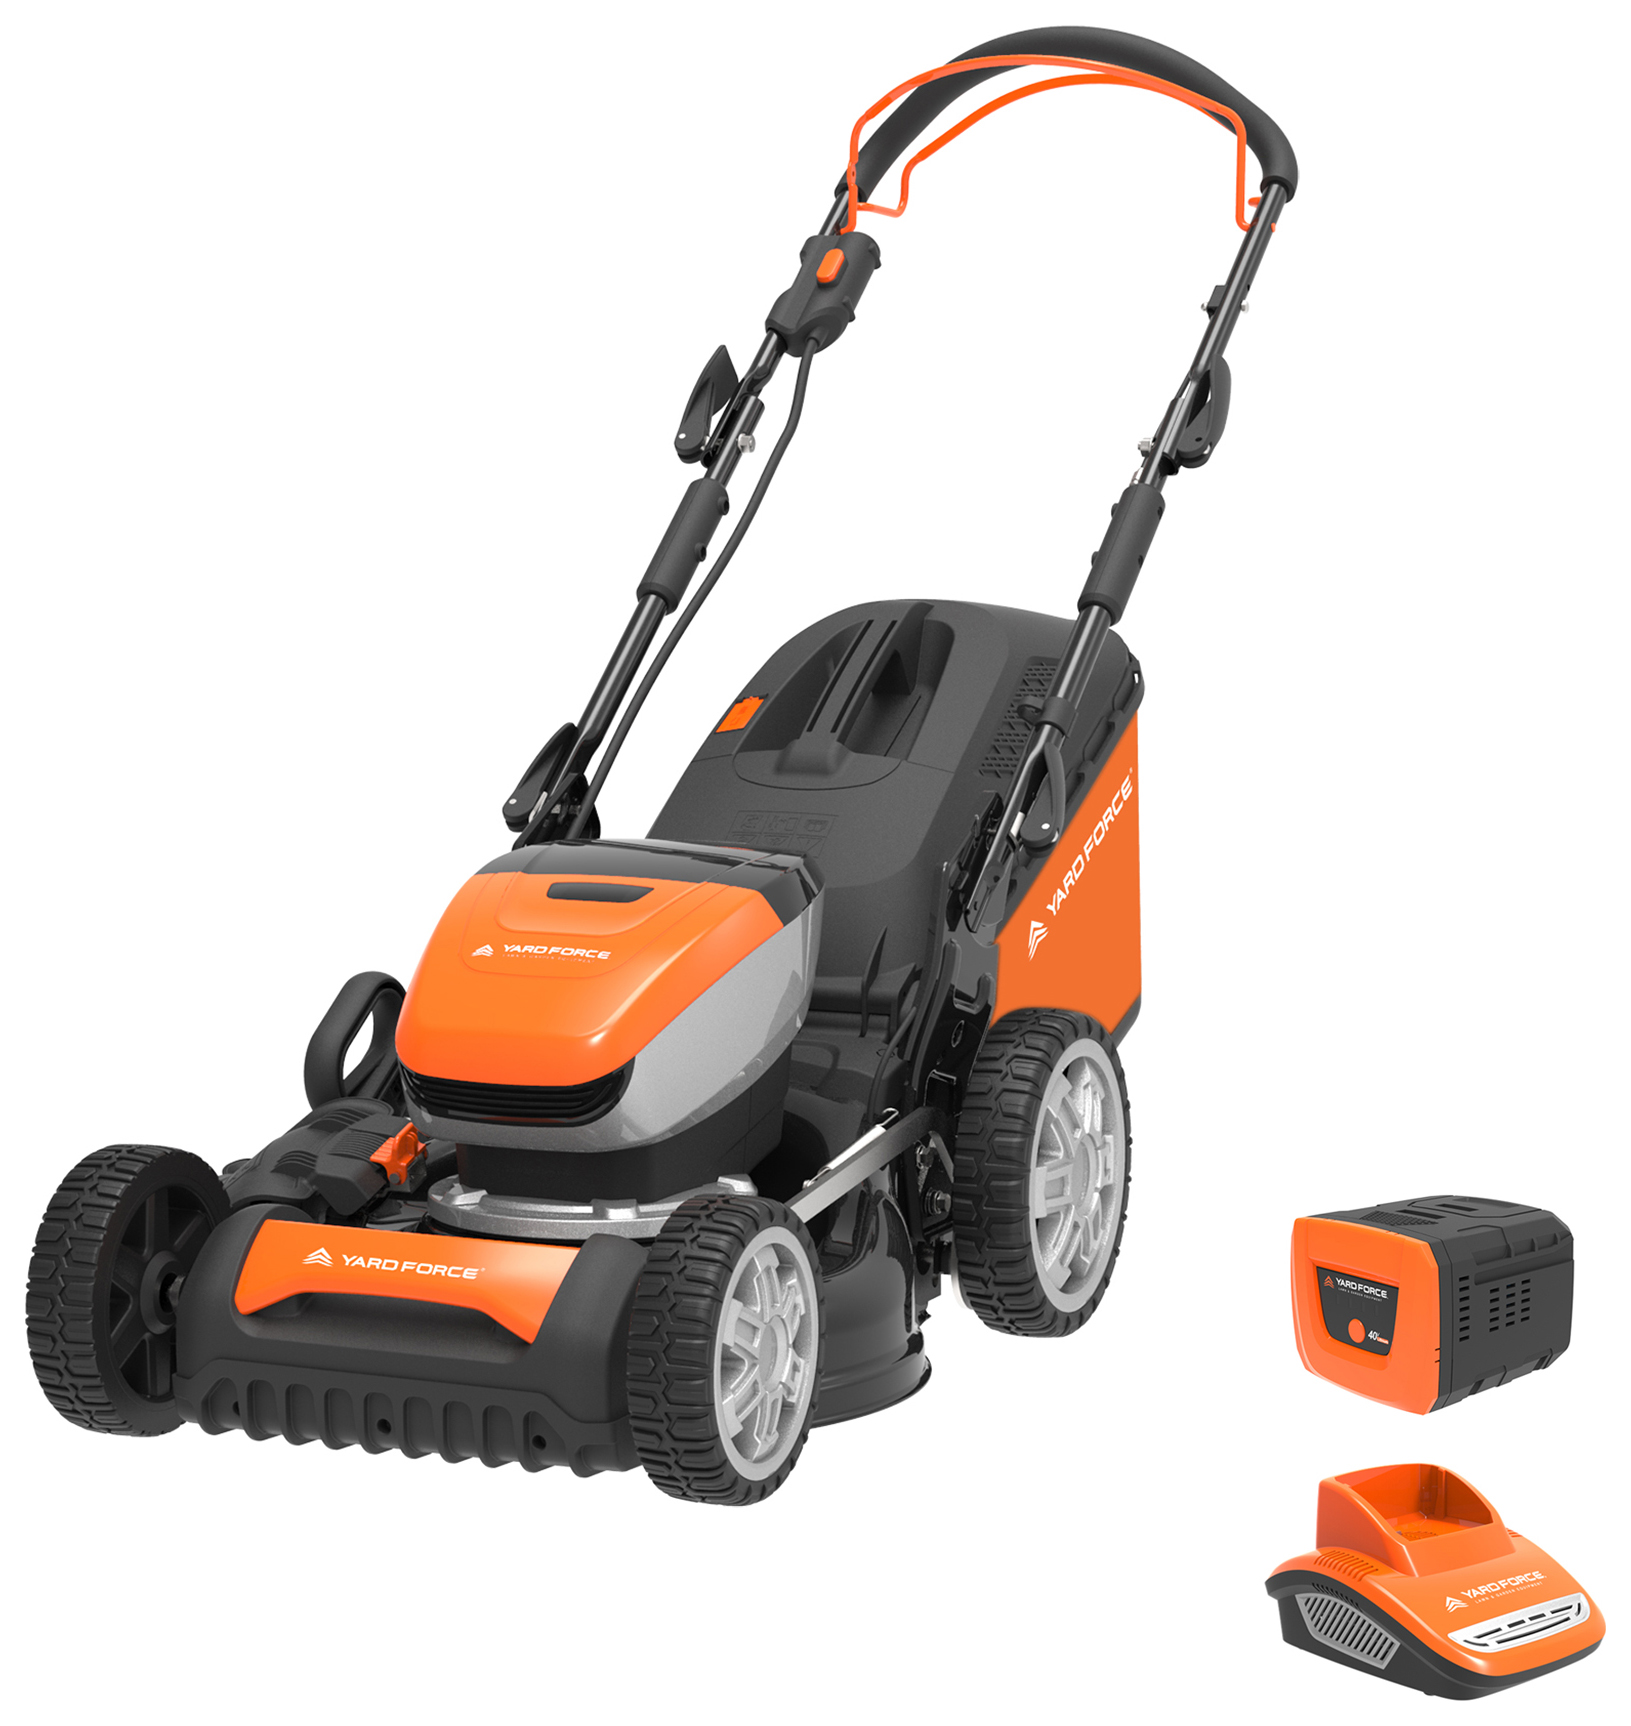 Yard Force LM G46E 40V 46cm Self-Propelled Cordless Lawnmower with 4AH Lithium-ion Battery & Quick Charger